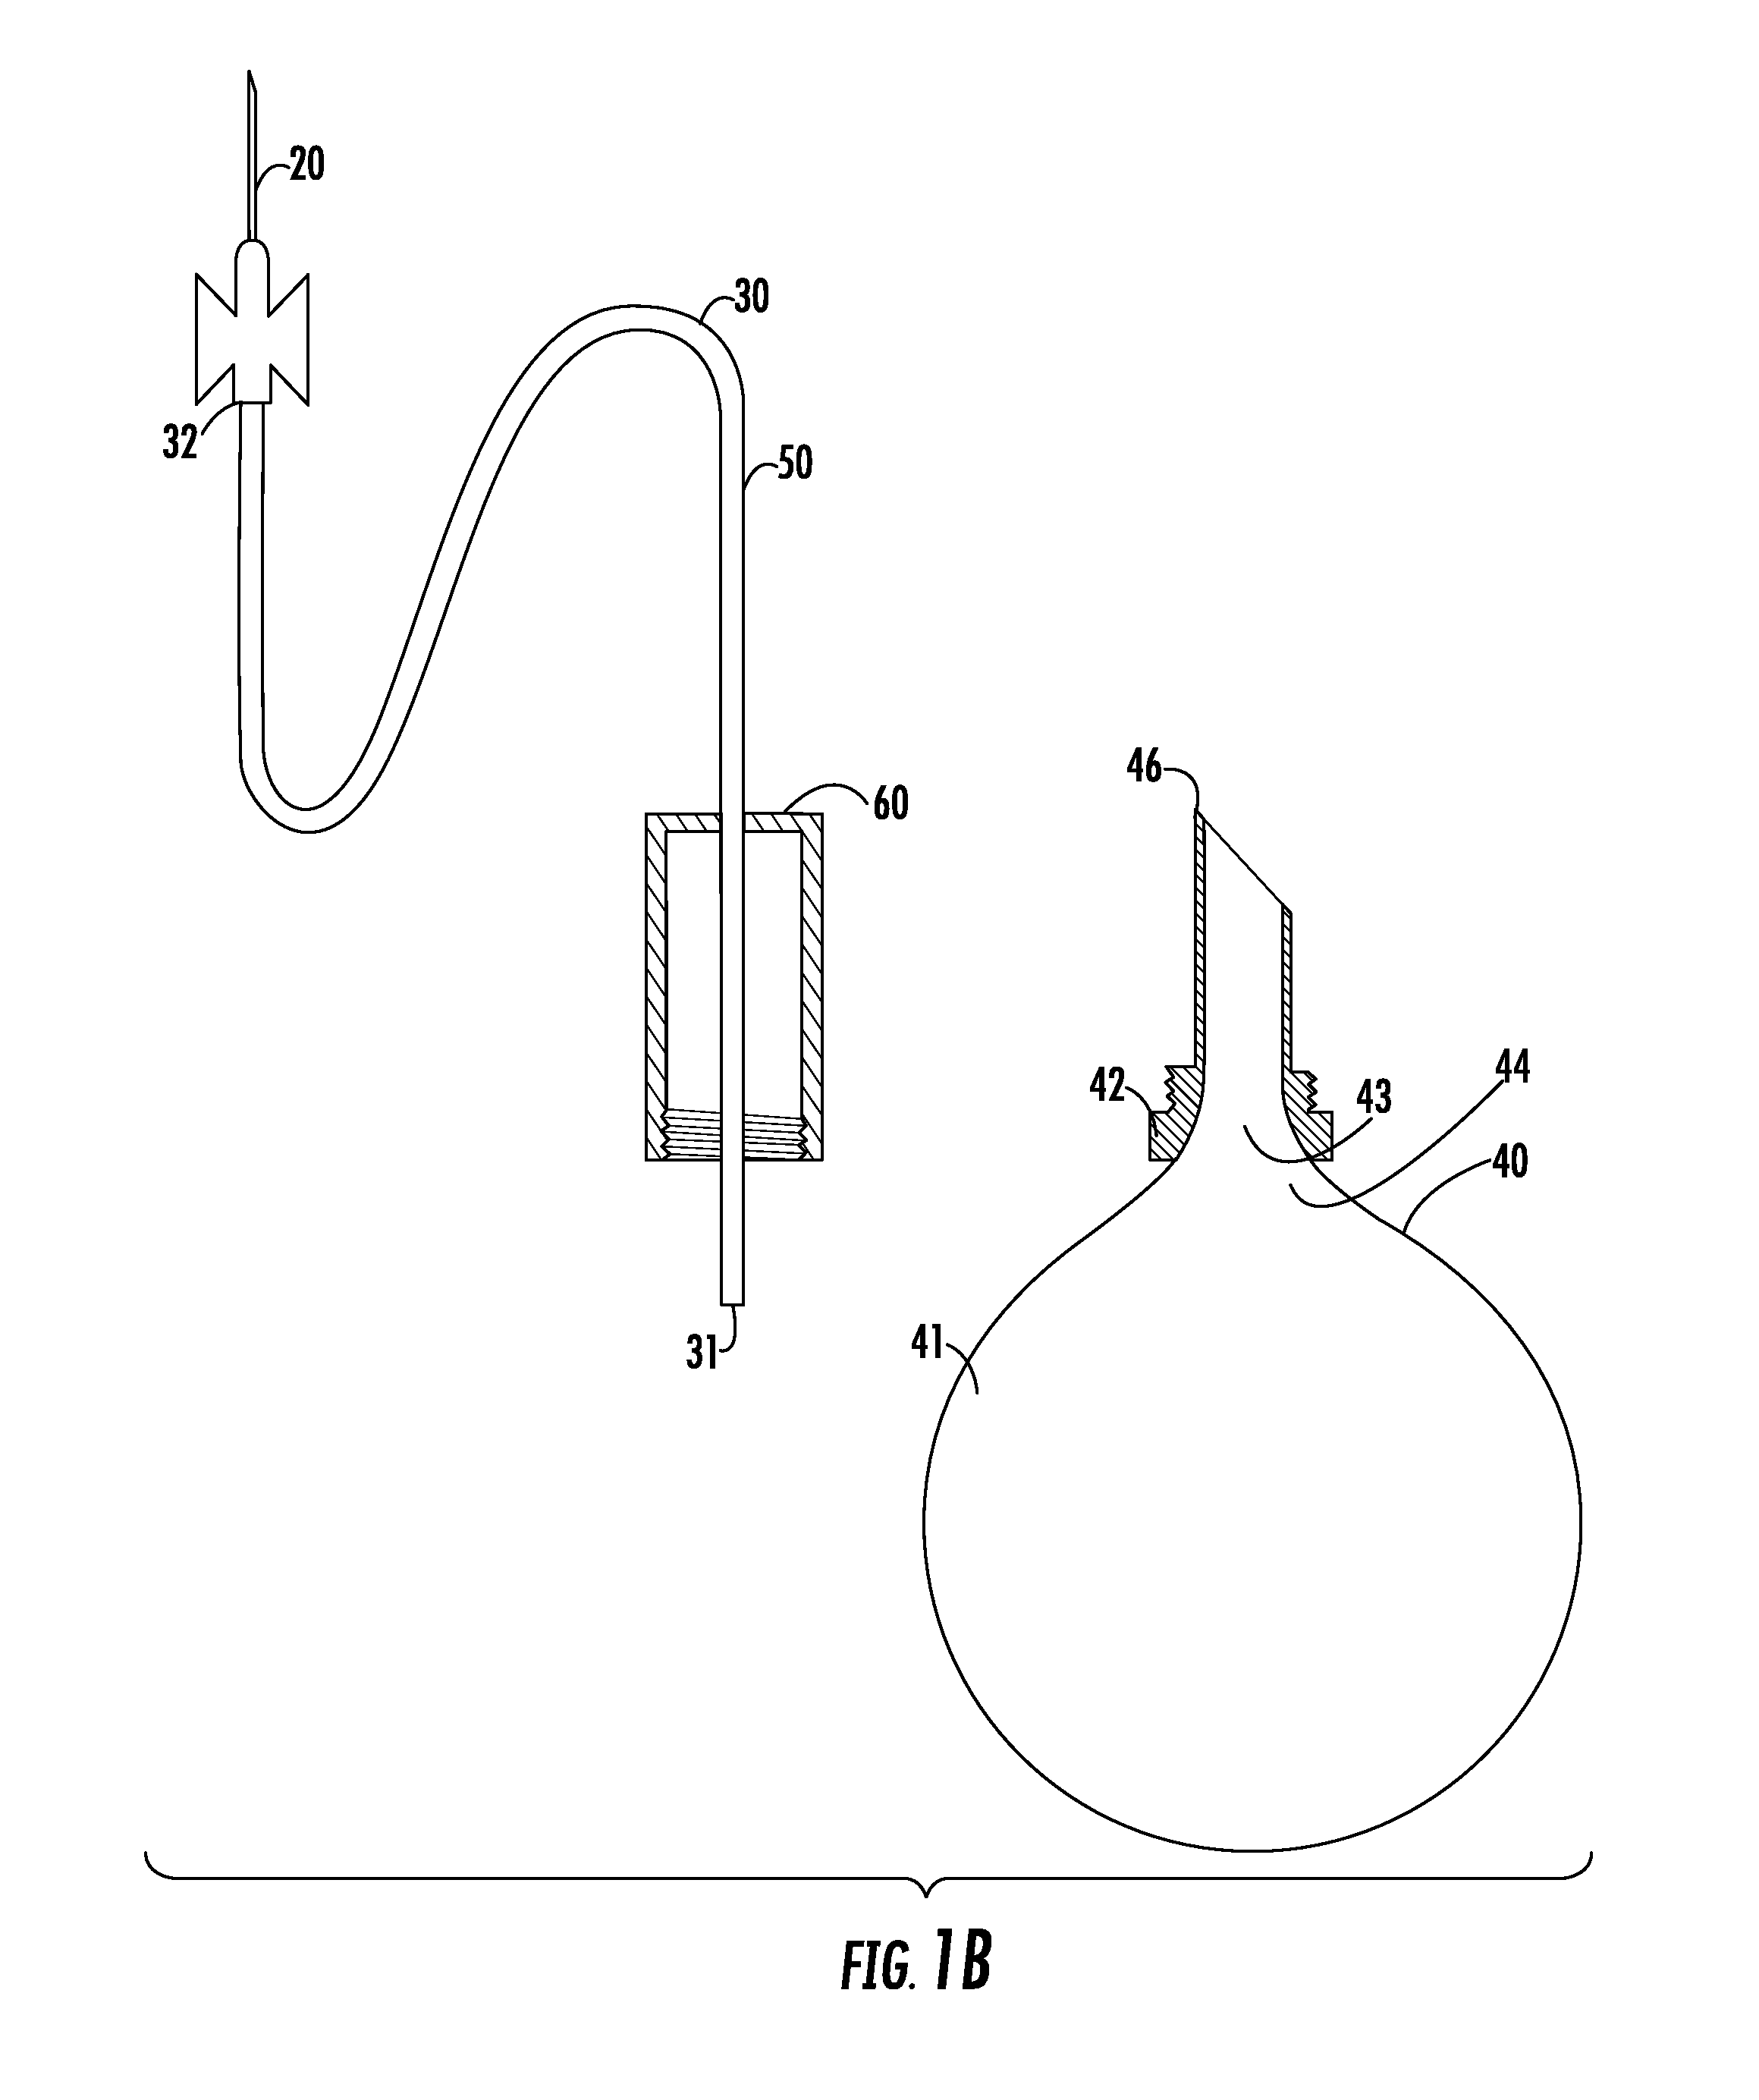 Apparatus and method for breast reconstruction and augmentation using an autologous platelet-rich fibrin matrix